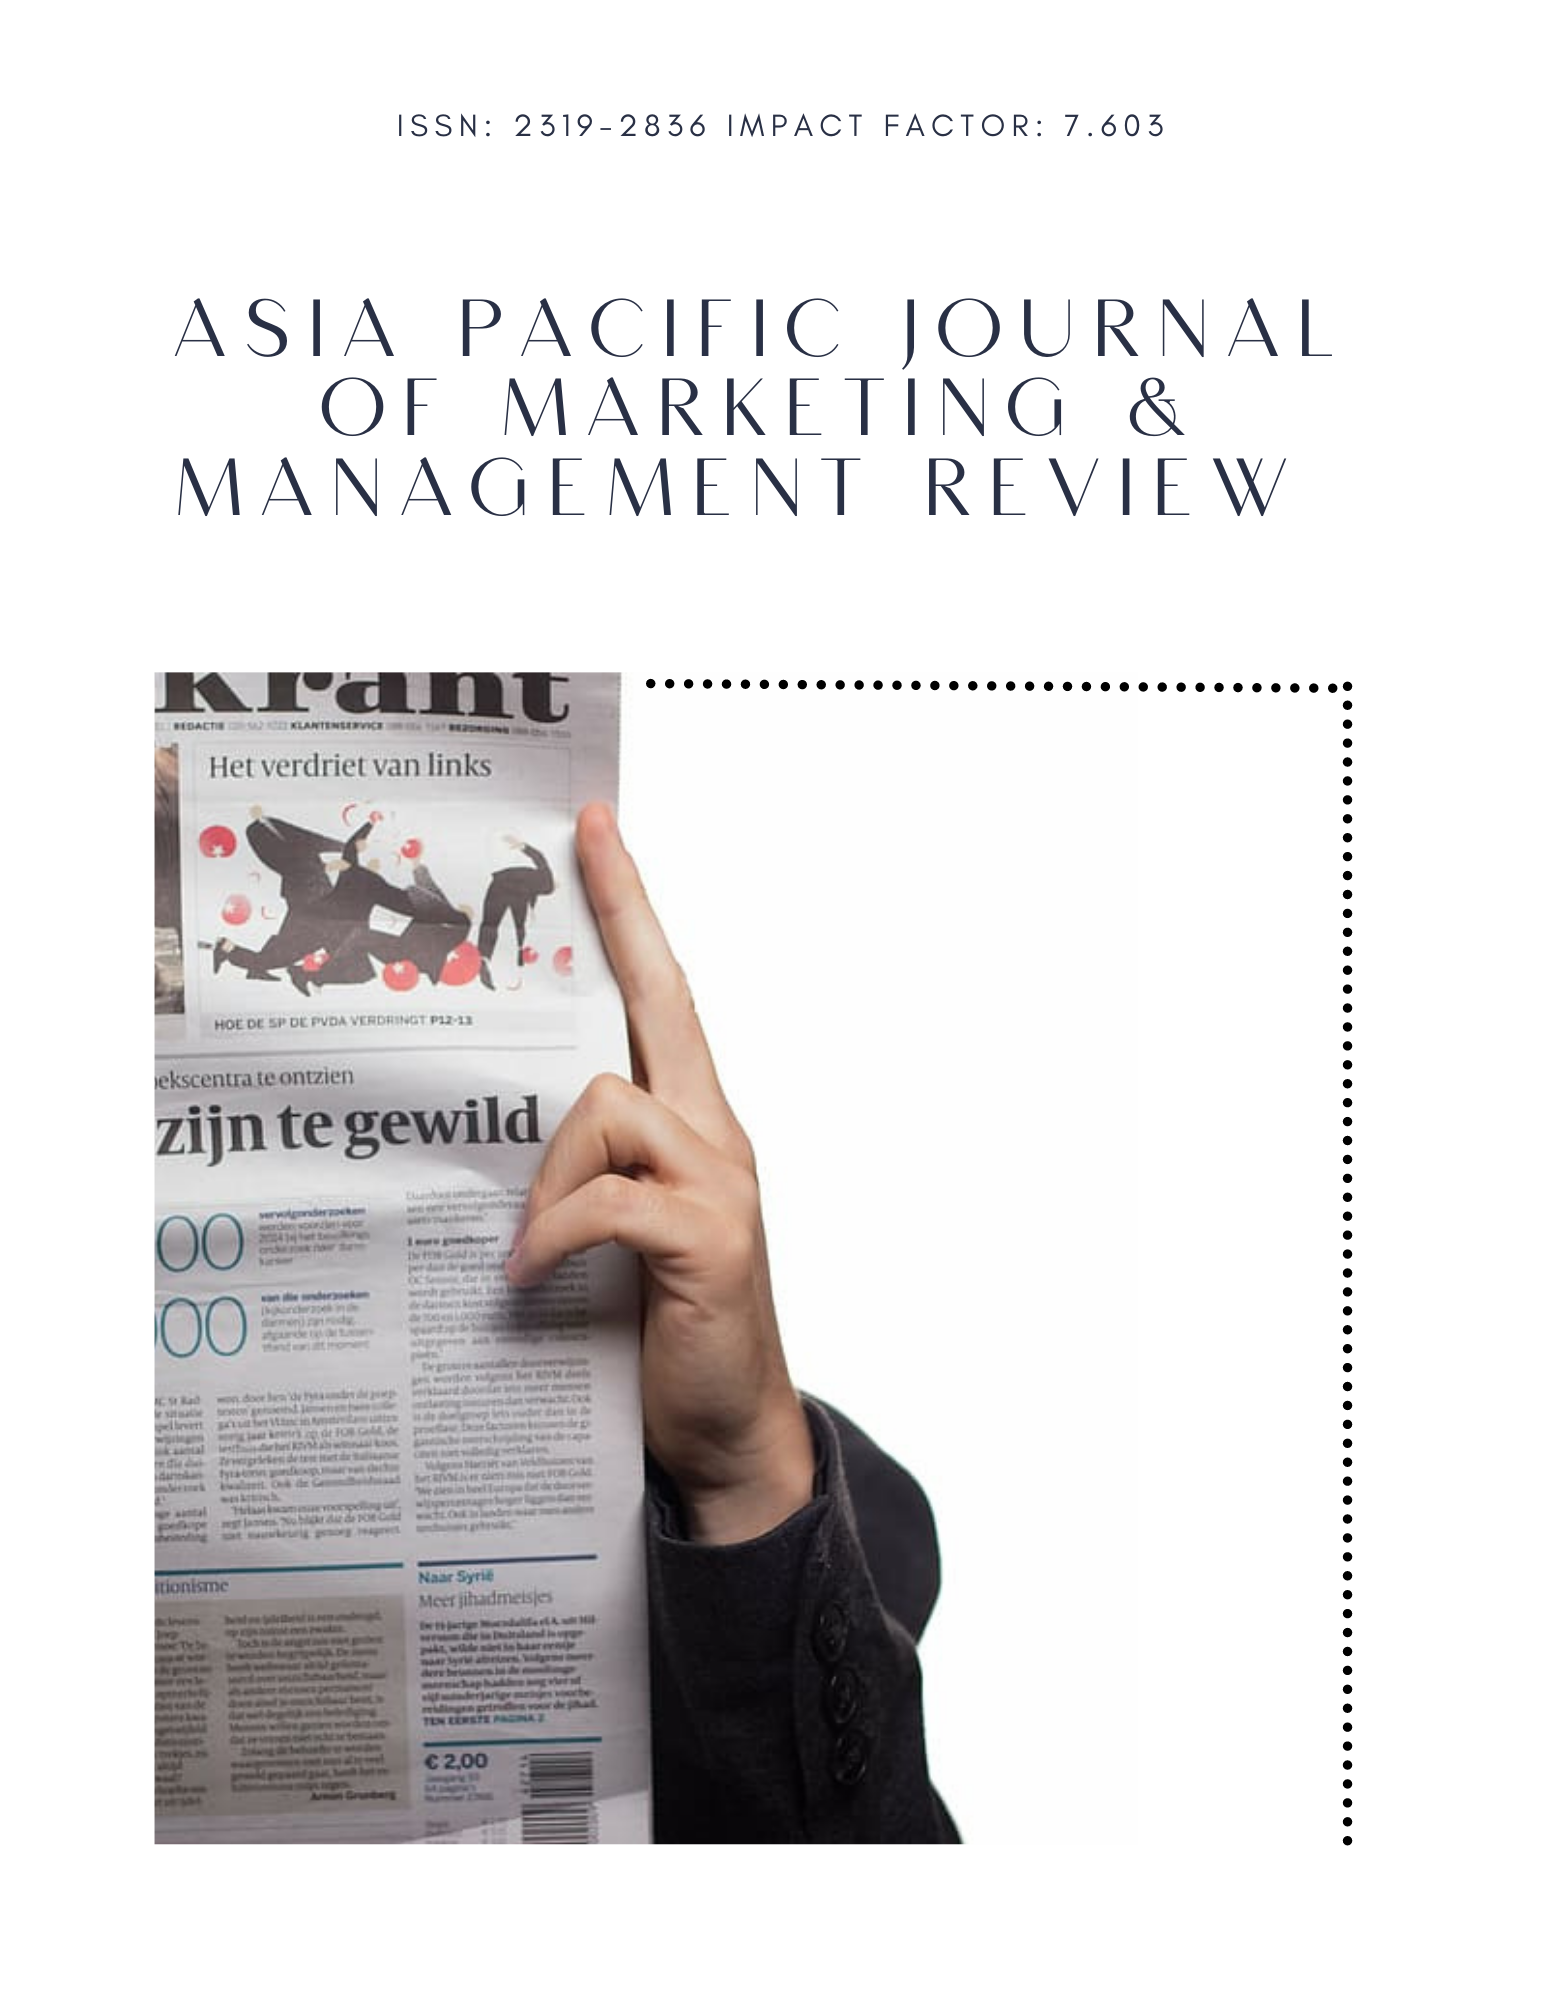 					View Vol. 11 No. 02 (2022): ASIA PACIFIC JOURNAL OF MARKETING & MANAGEMENT REVIEW
				